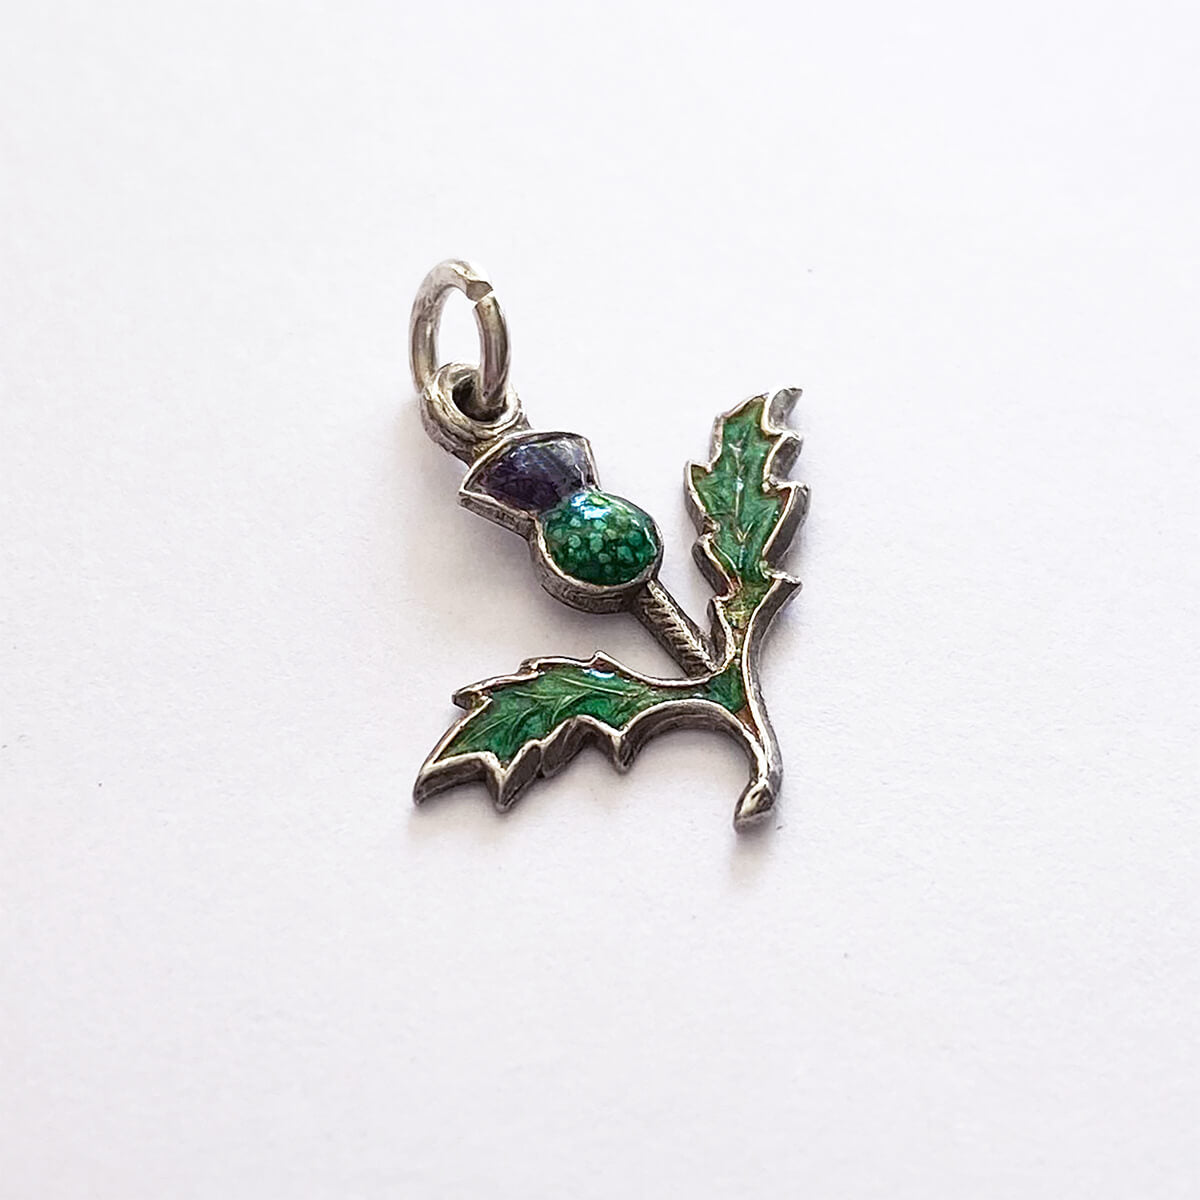 Vintage thistle charm silver flower pendant with purple and green enamel 